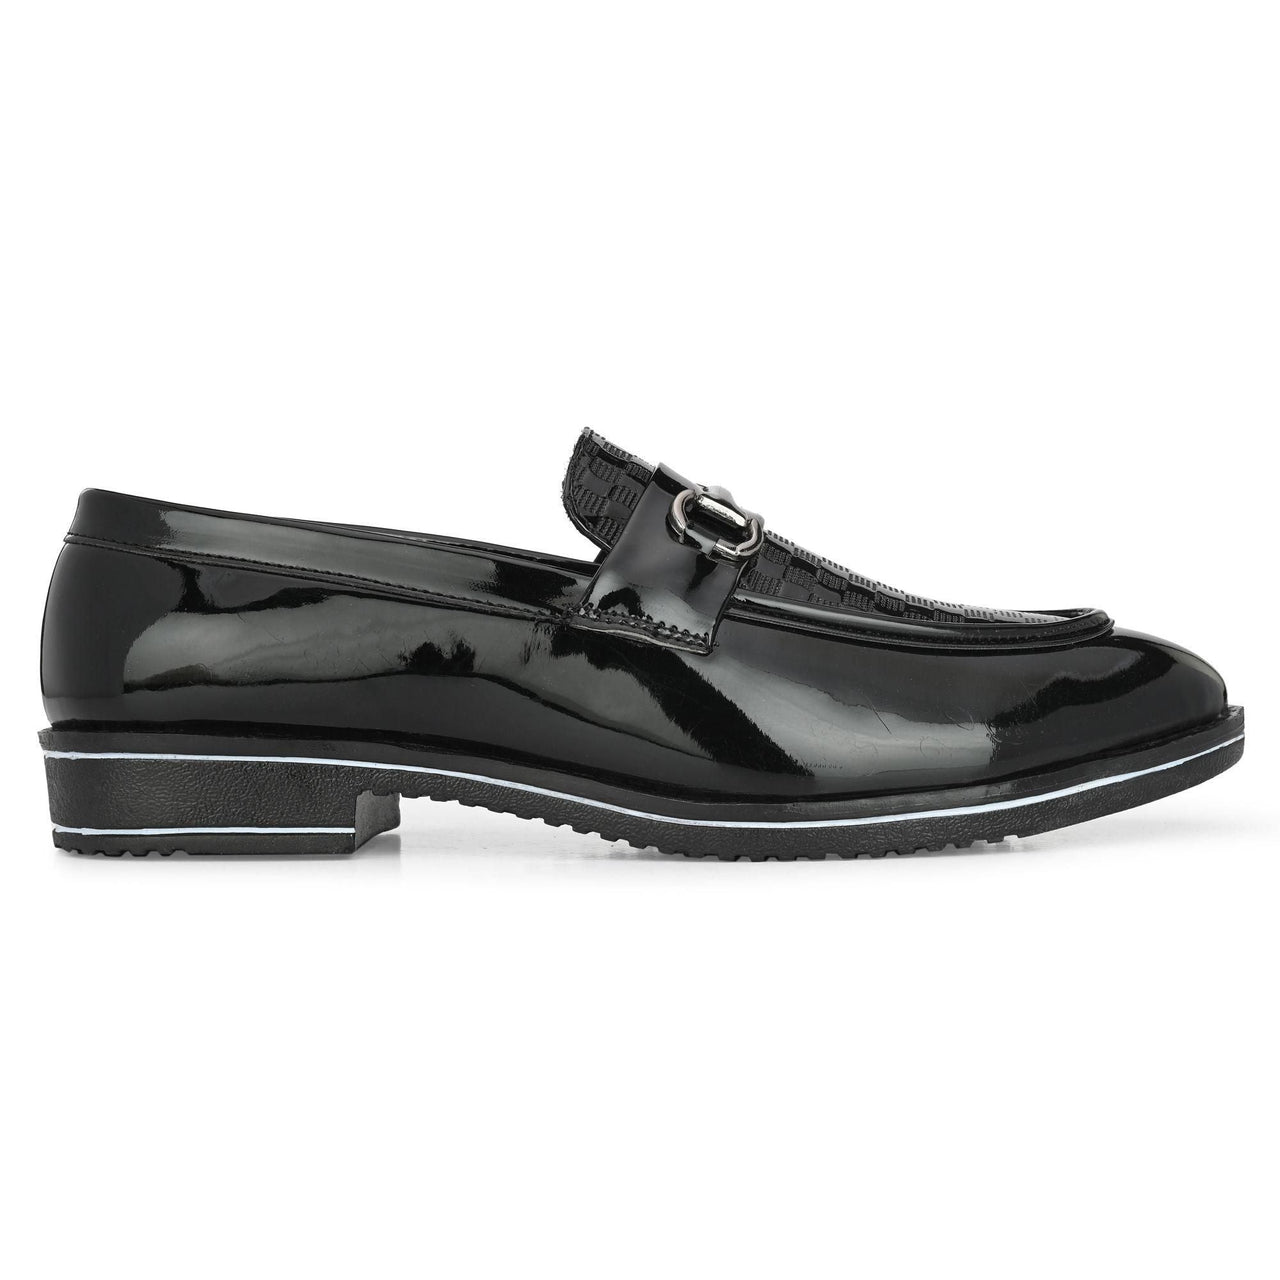 AIRBELL Men's Black Solid Patent foam Outdoor casual Loafers